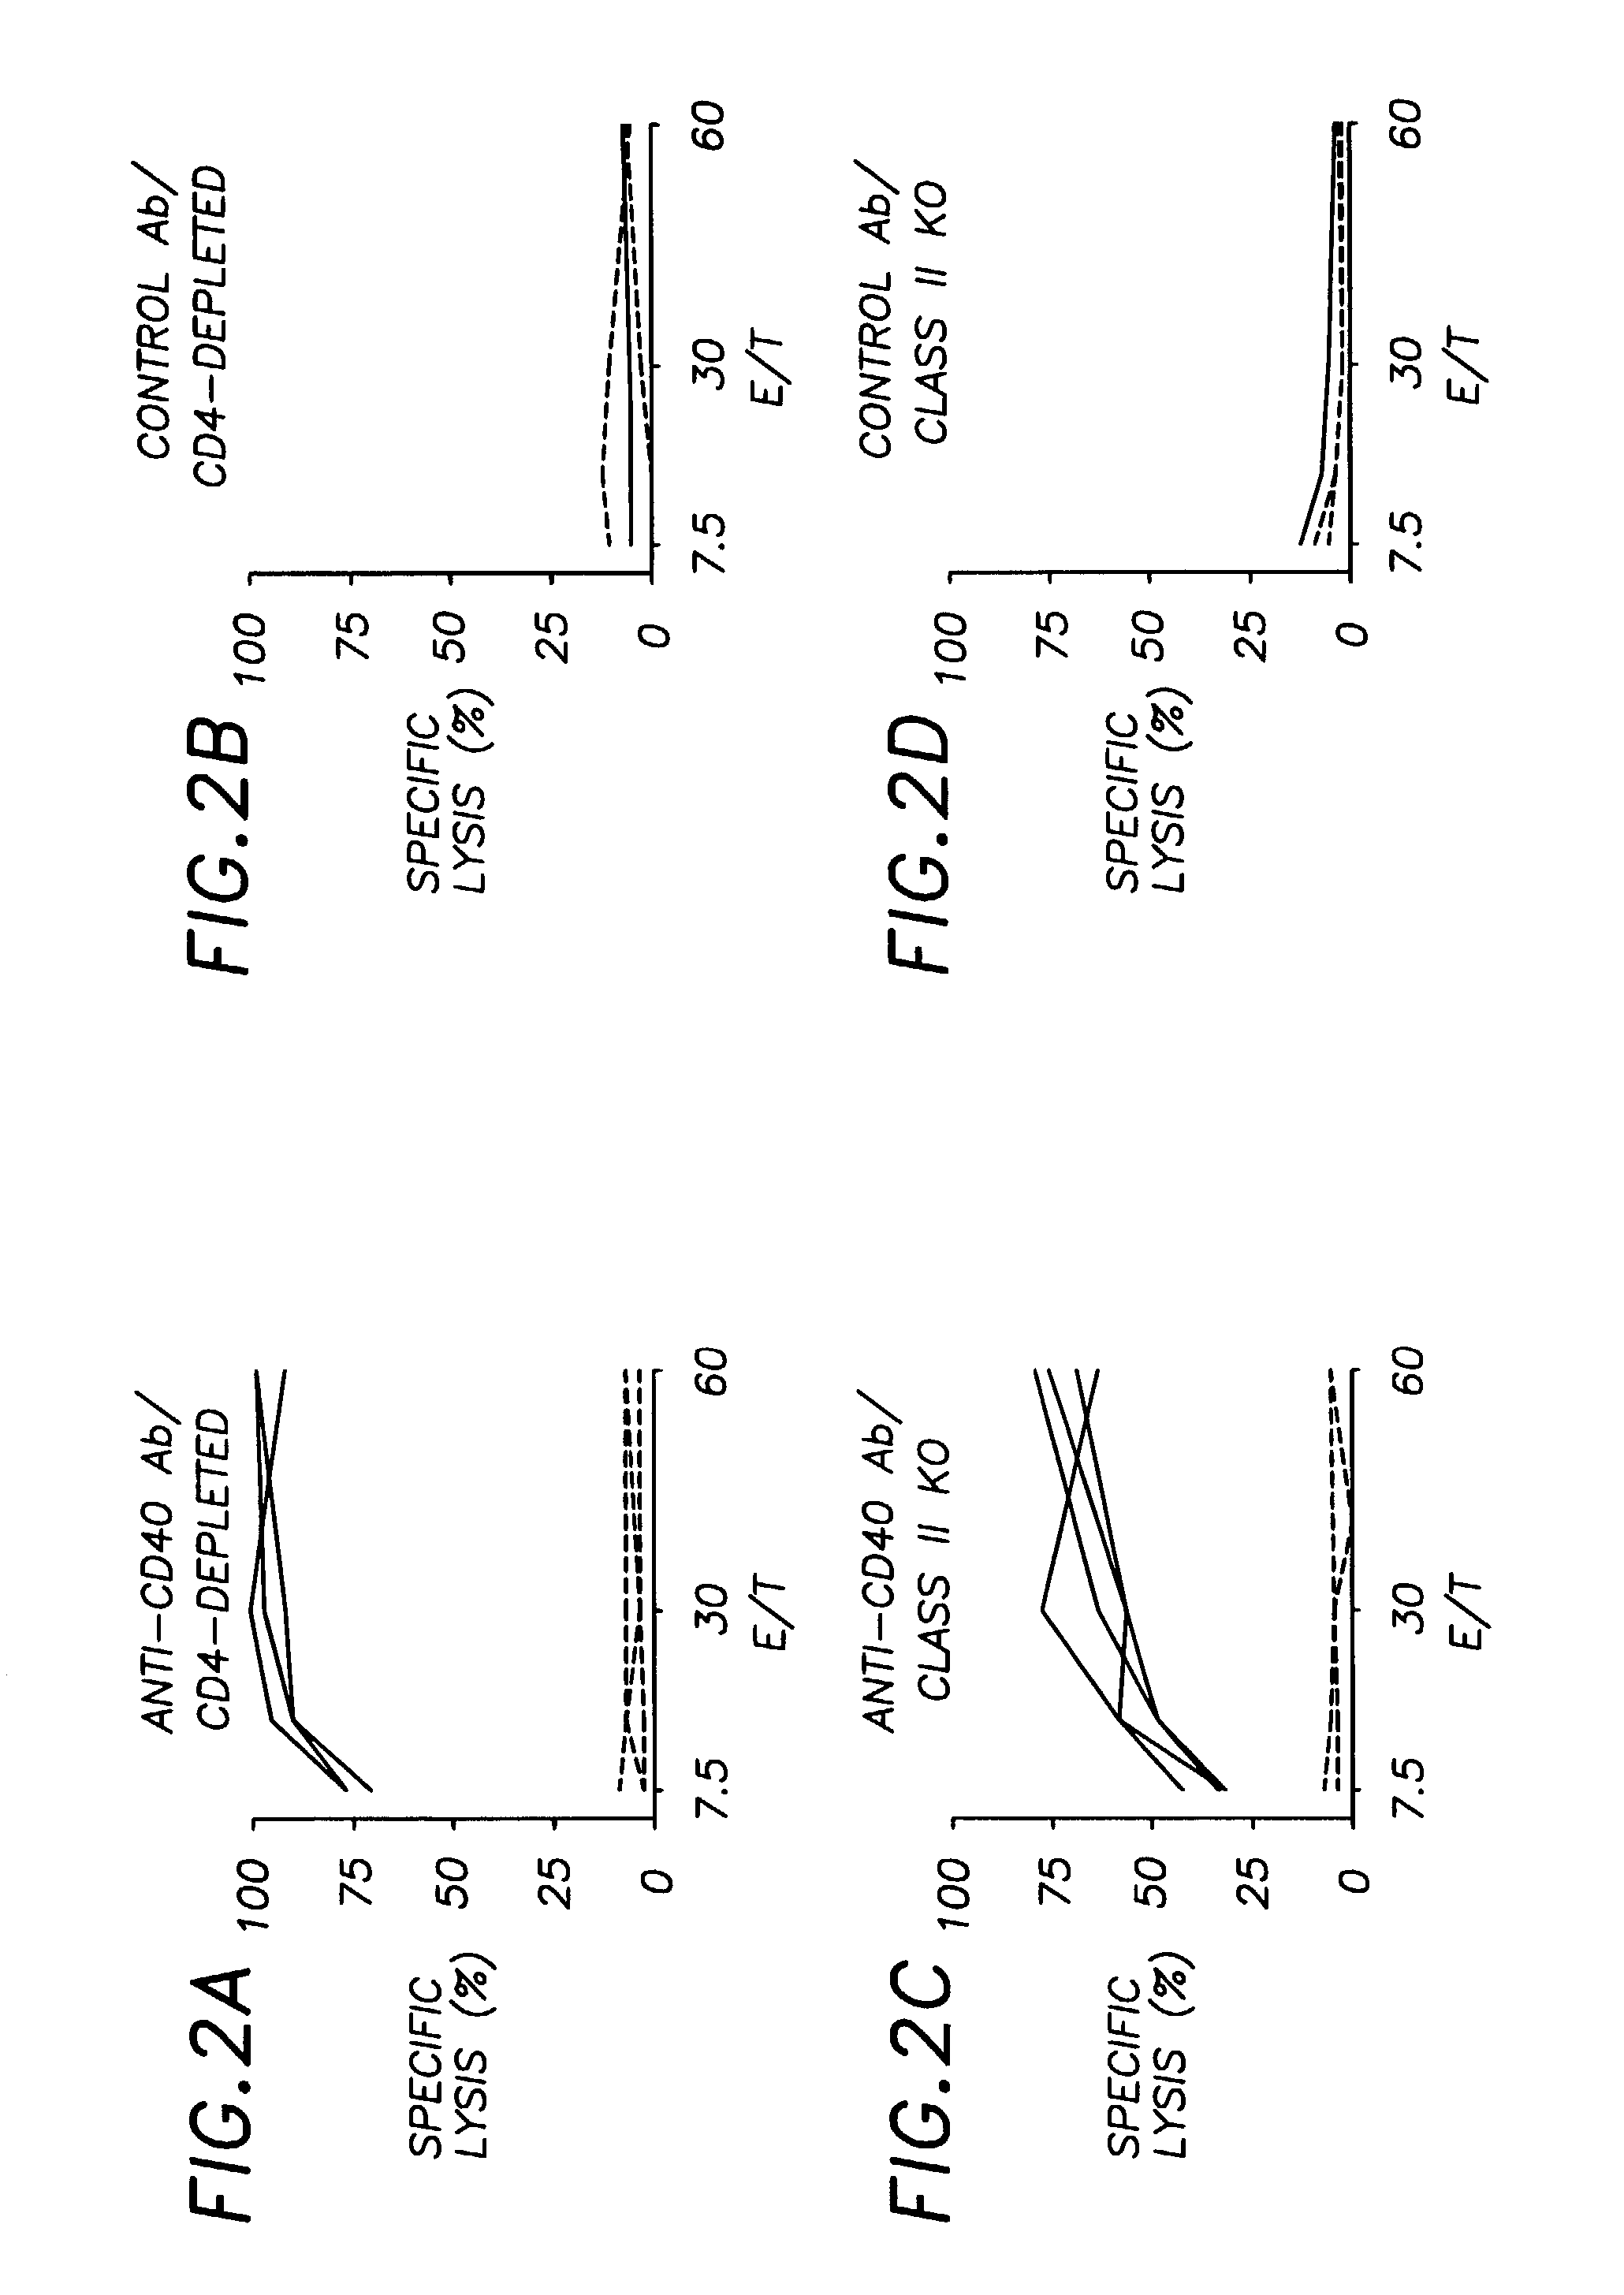 CD40 binding molecules and CTL peptides for treating tumors